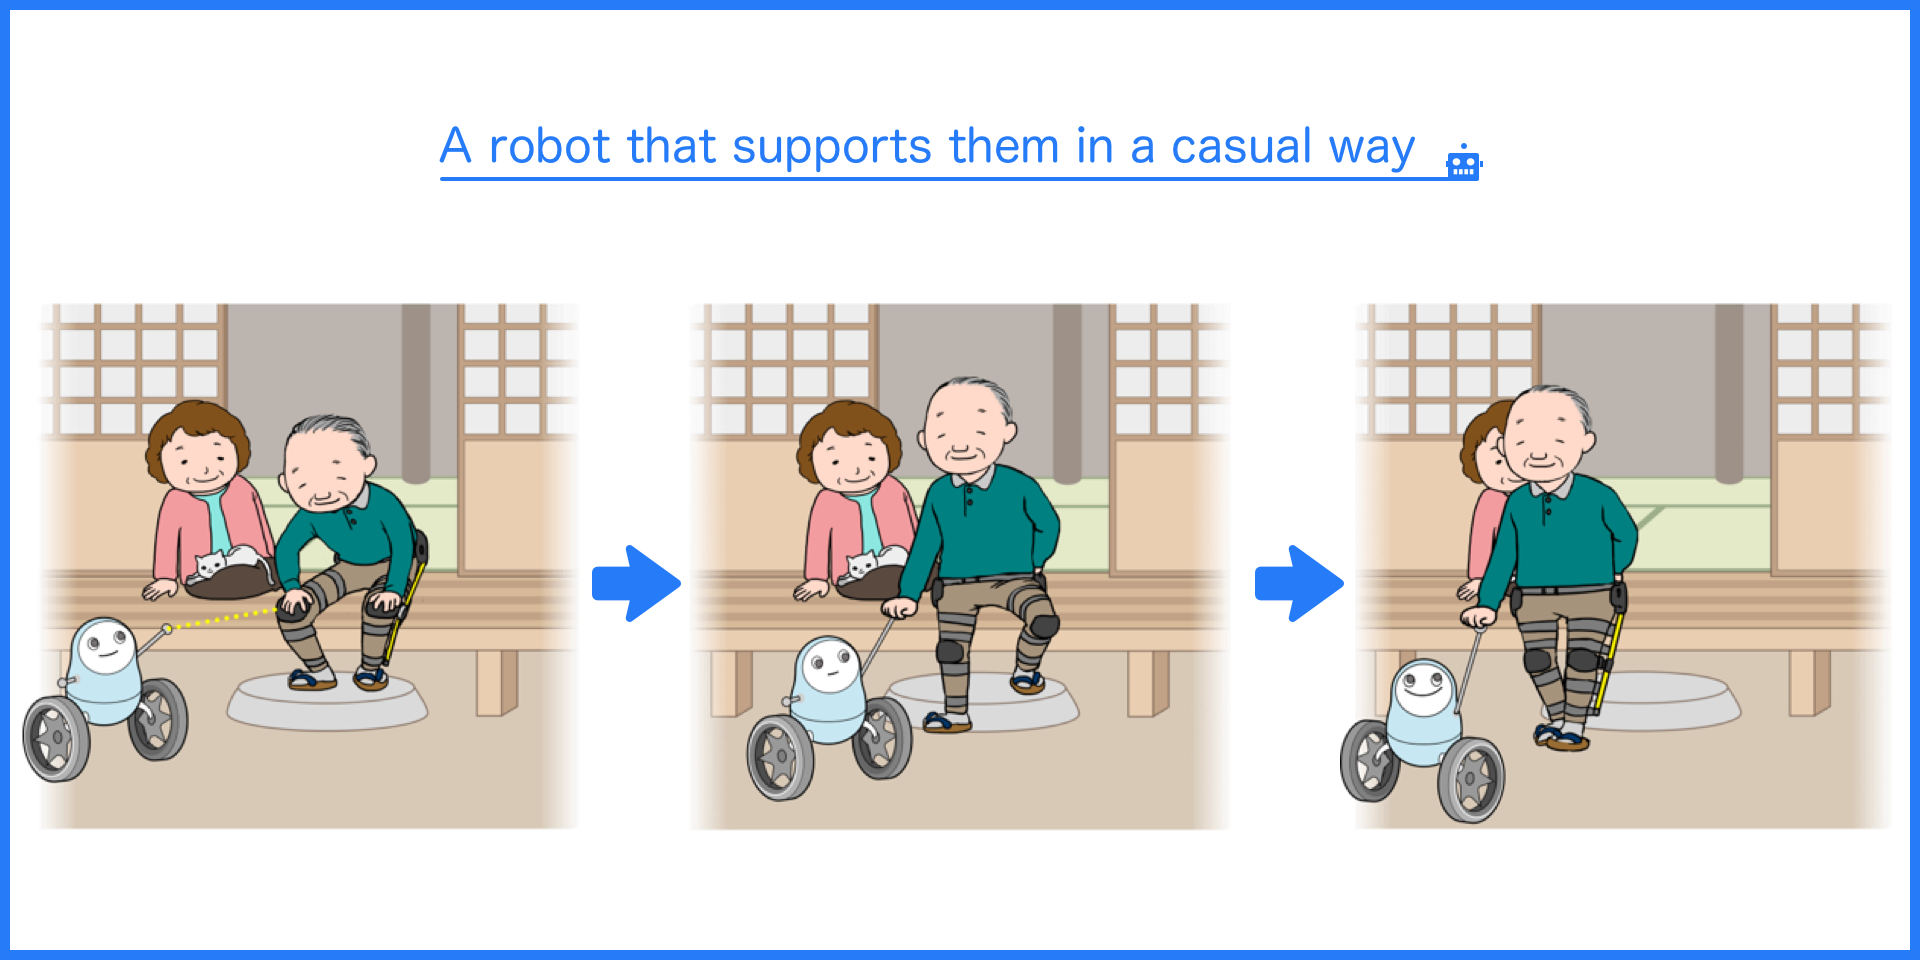 A robot that supports them in a casual way.